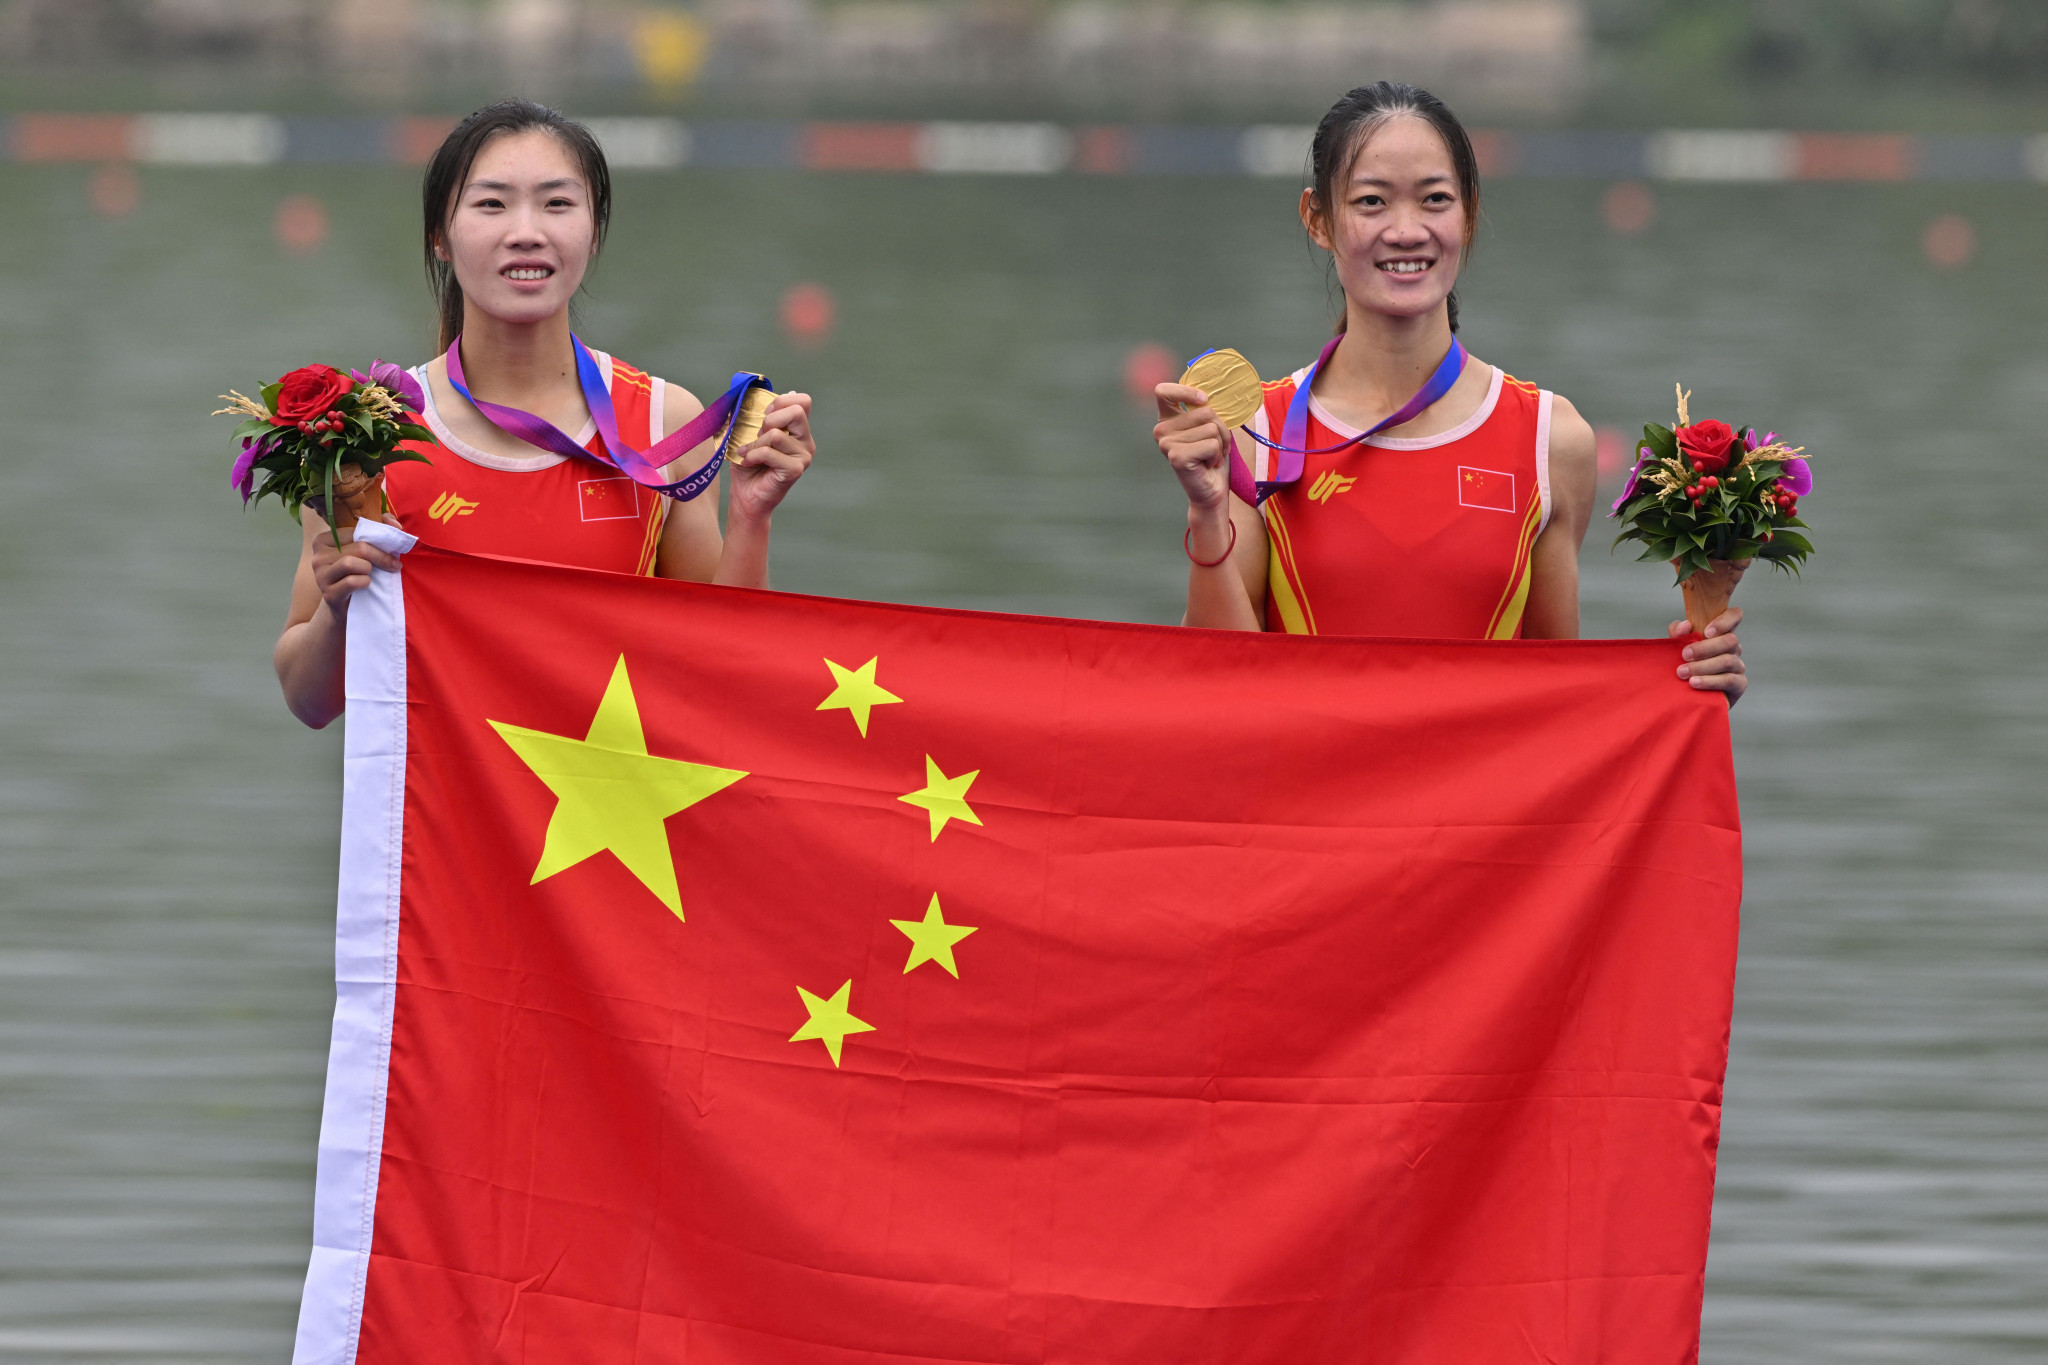 China stamp authority on first day of rowing finals at Hangzhou 2022